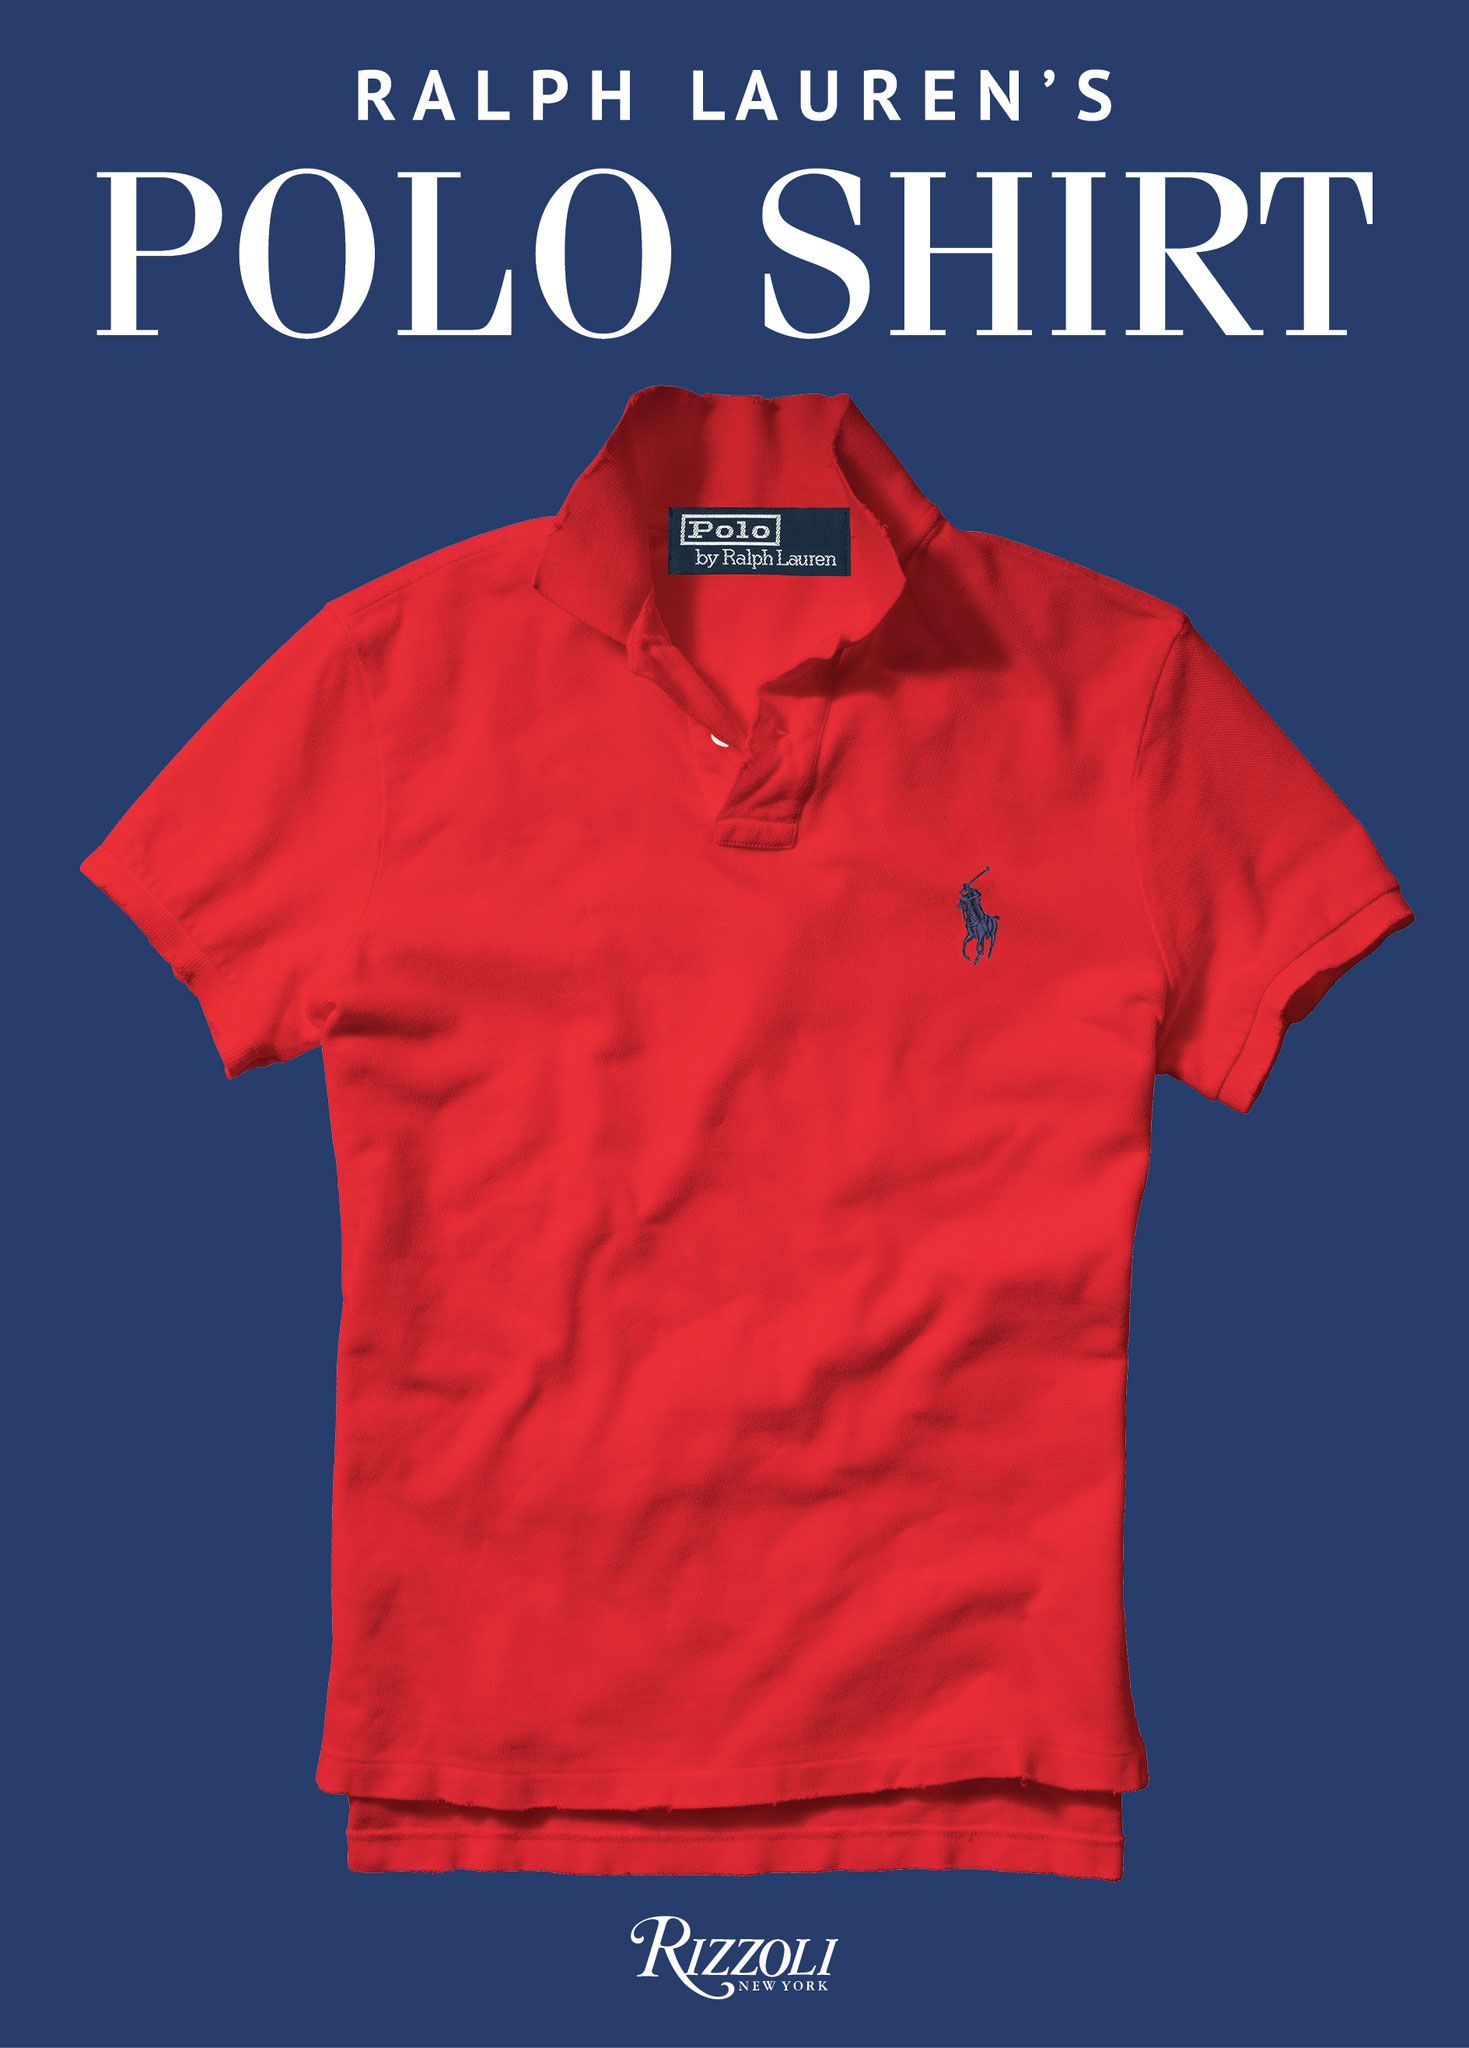 Total 79+ imagen matching ralph lauren polo shirts for family - Abzlocal.mx